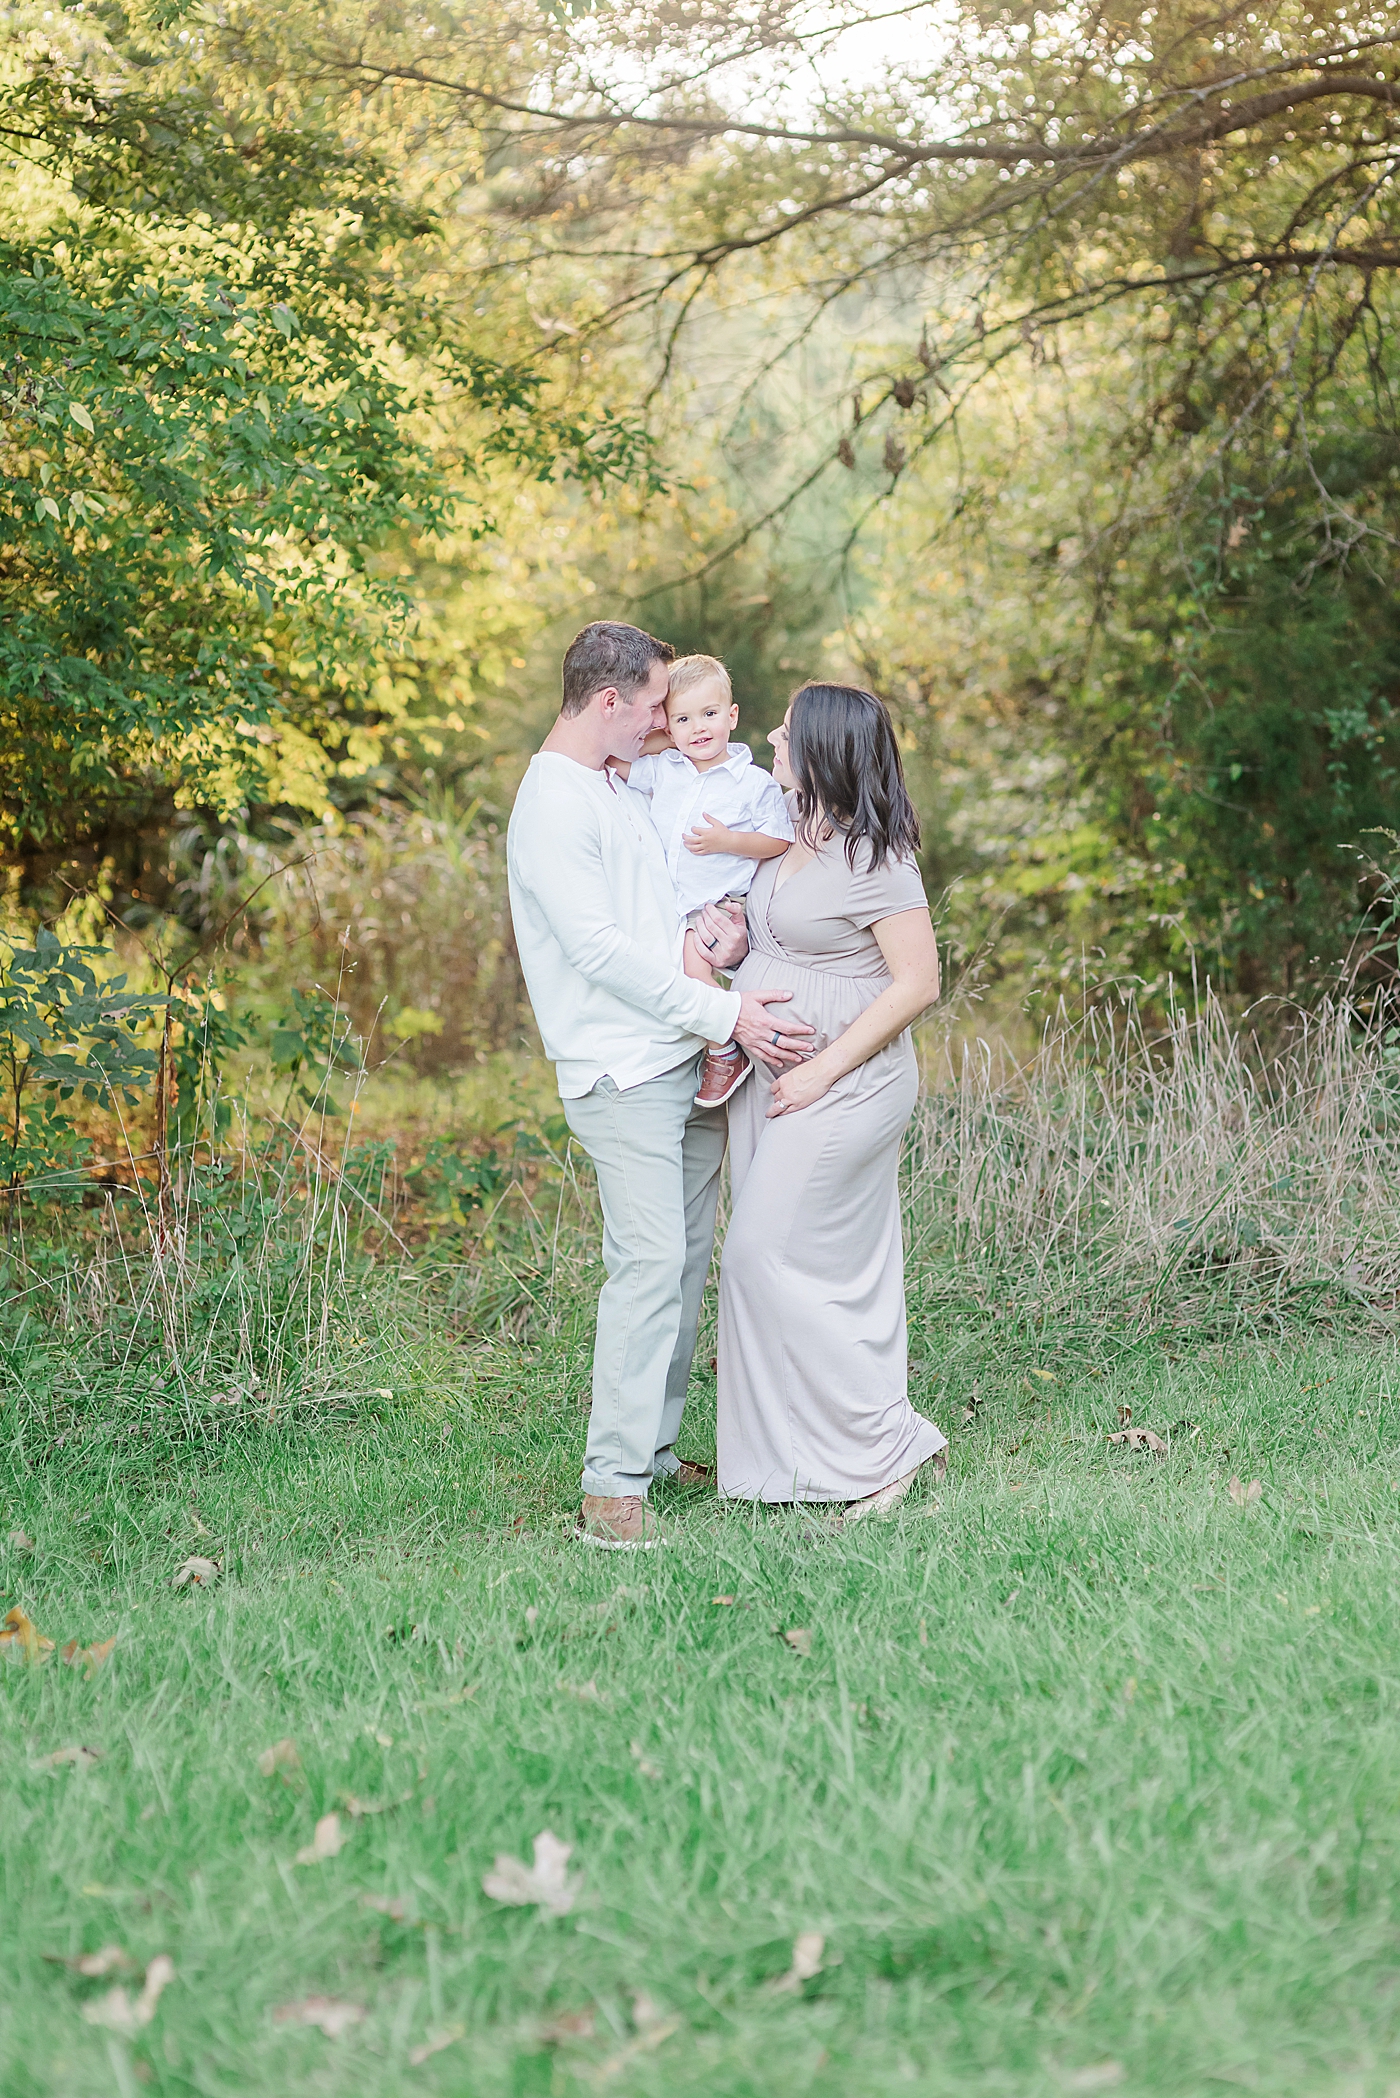 Mom and dad smiling at toddler son | Photo by Davidson Maternity Photographer Anna Wisjo